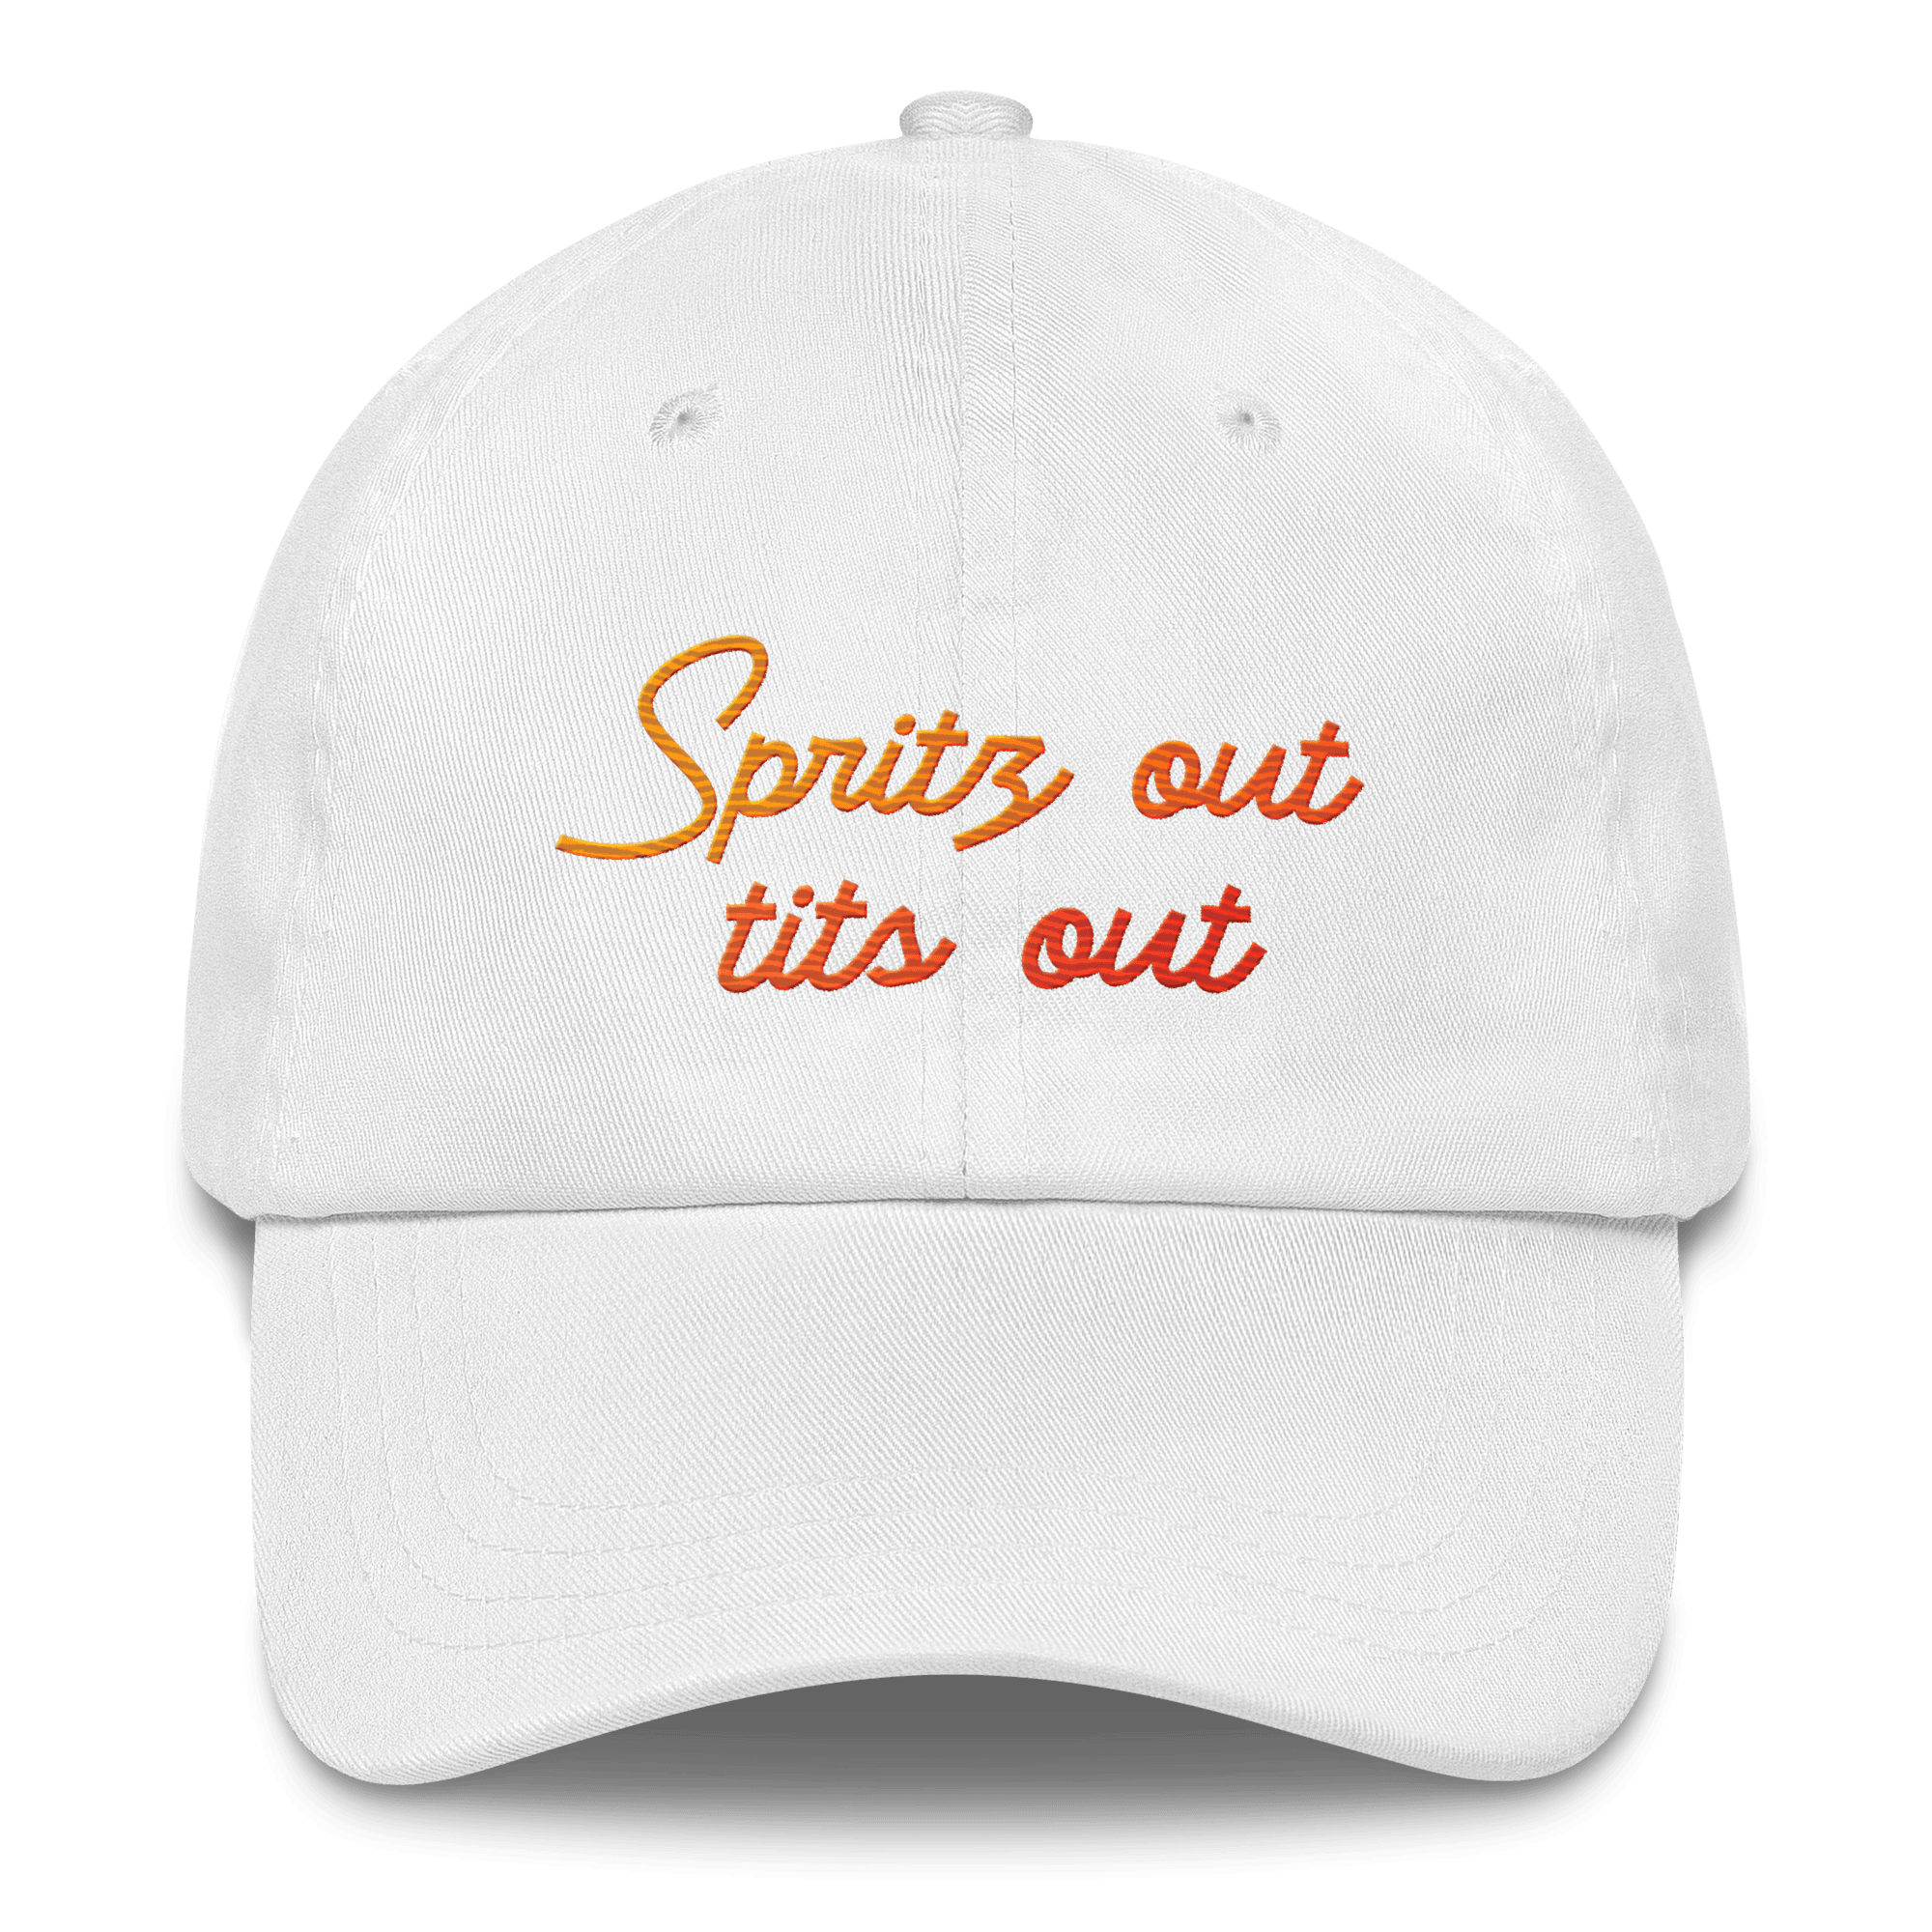 Spritz out, tits out - Gradient Embroidered Hat - Polychrome Goods 🍊